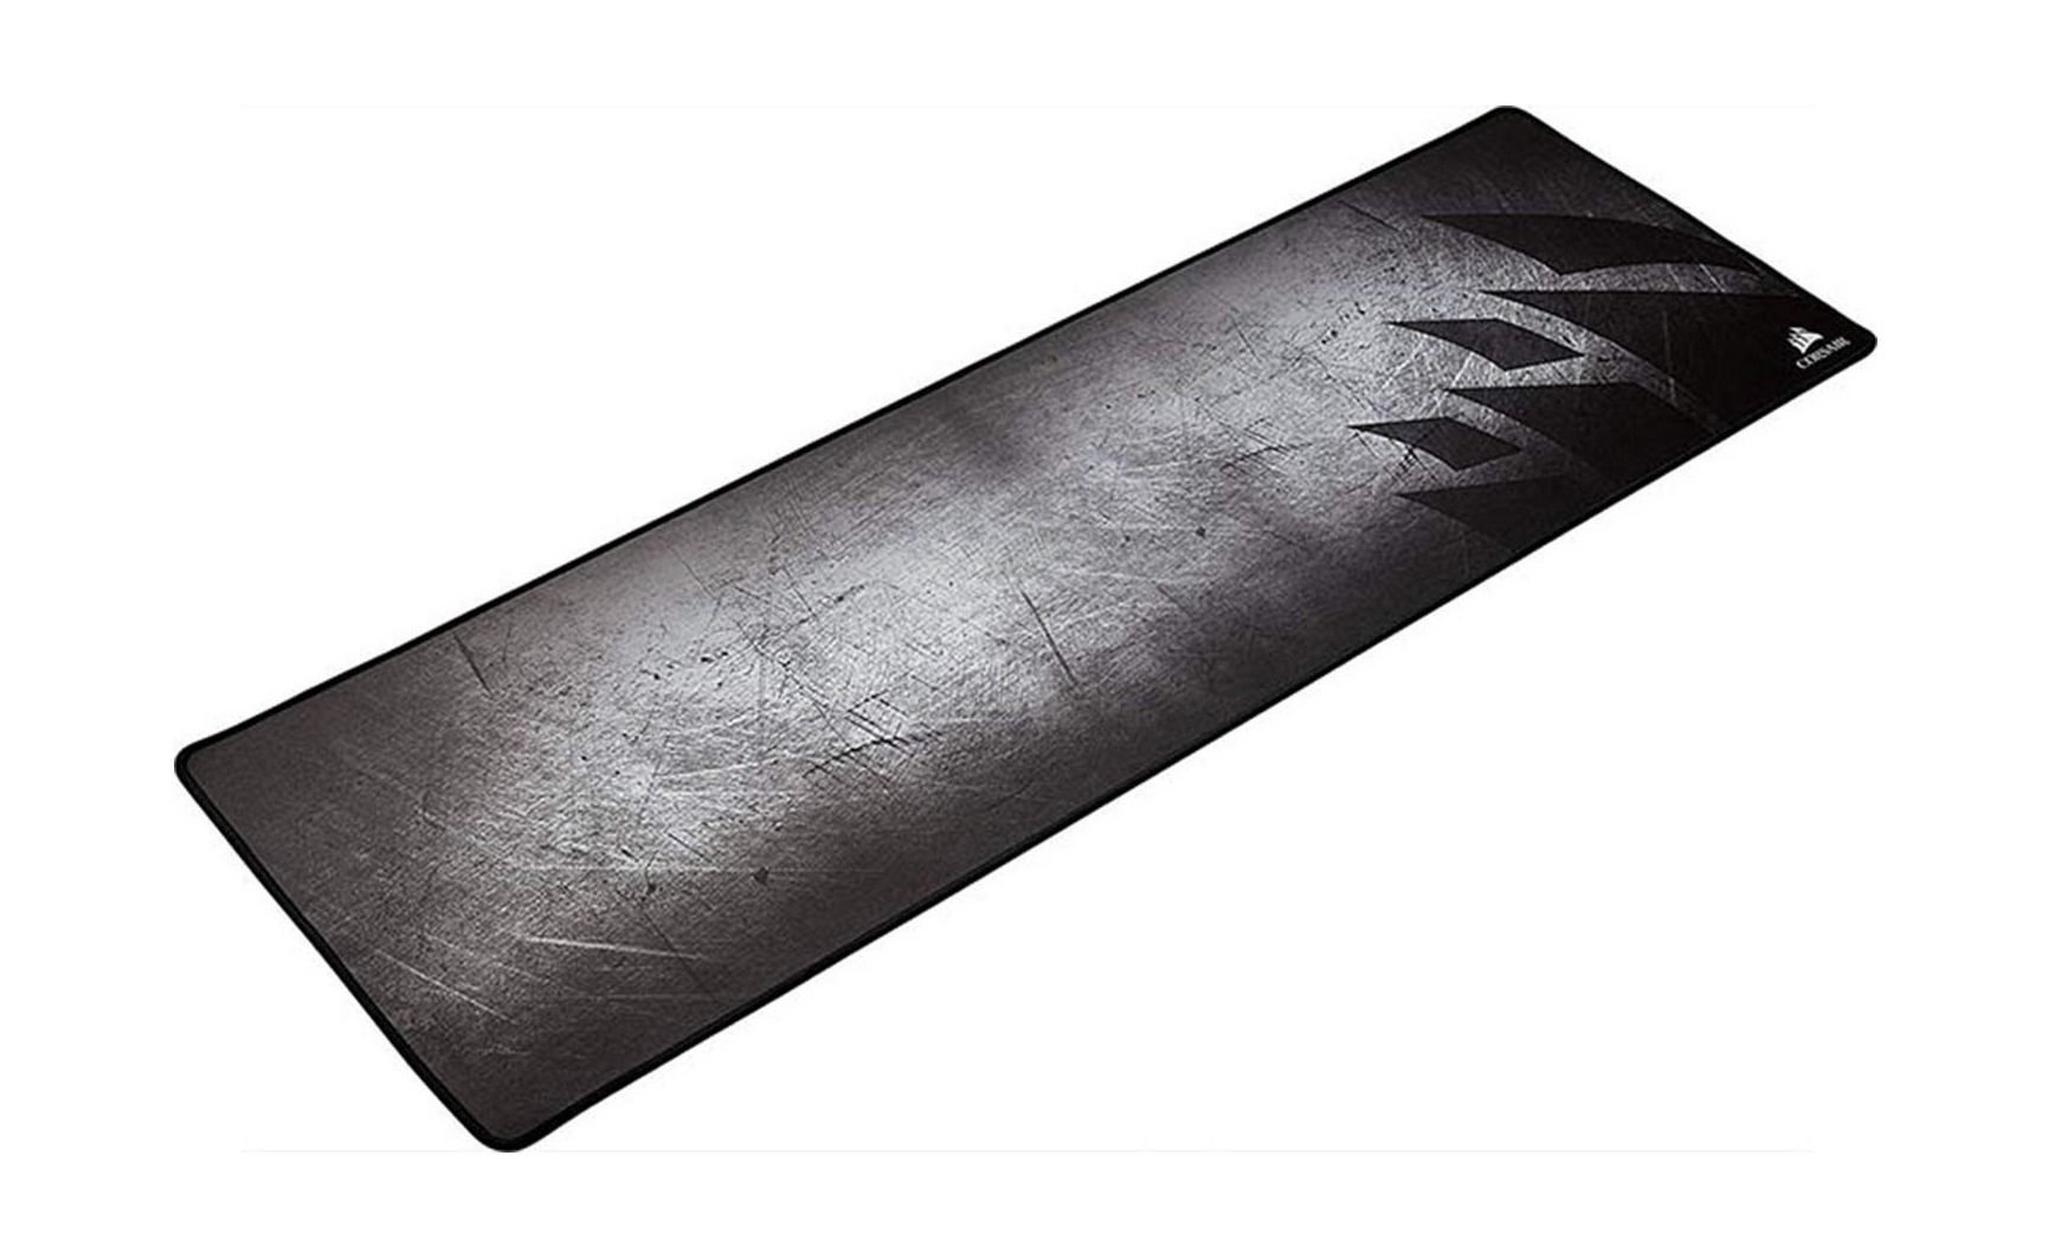 Corsair MM300 Anti-Fray Cloth Gaming Mouse Pad - Extended Black